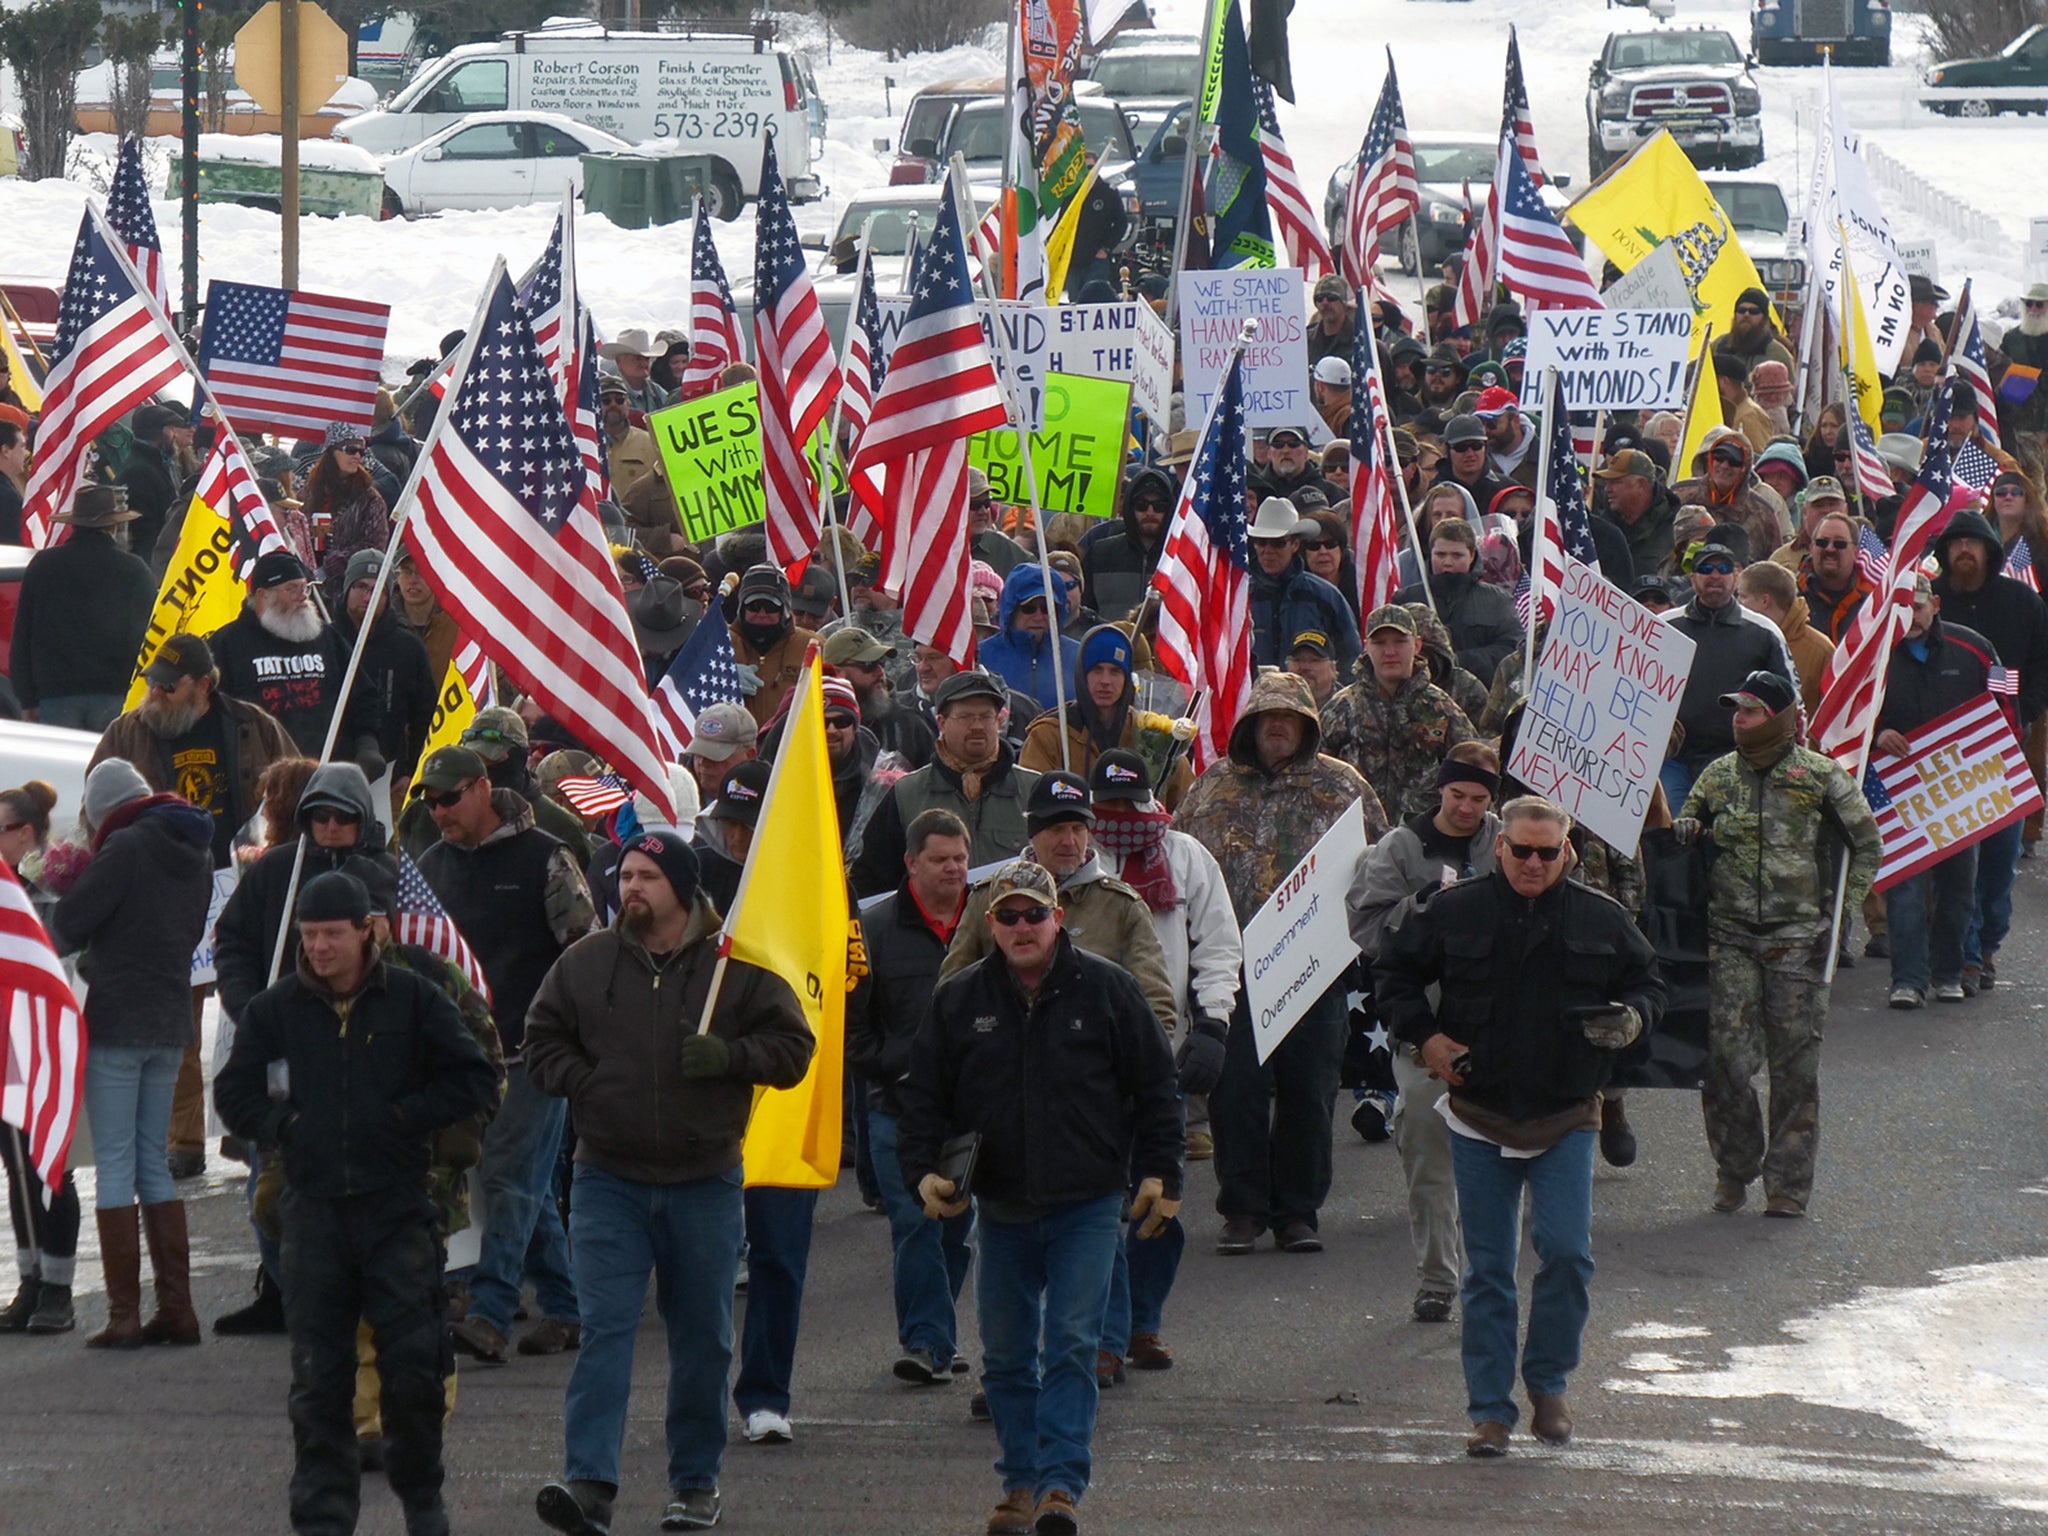 The 300-strong march in Burns that intimidated authorities was a bad omen